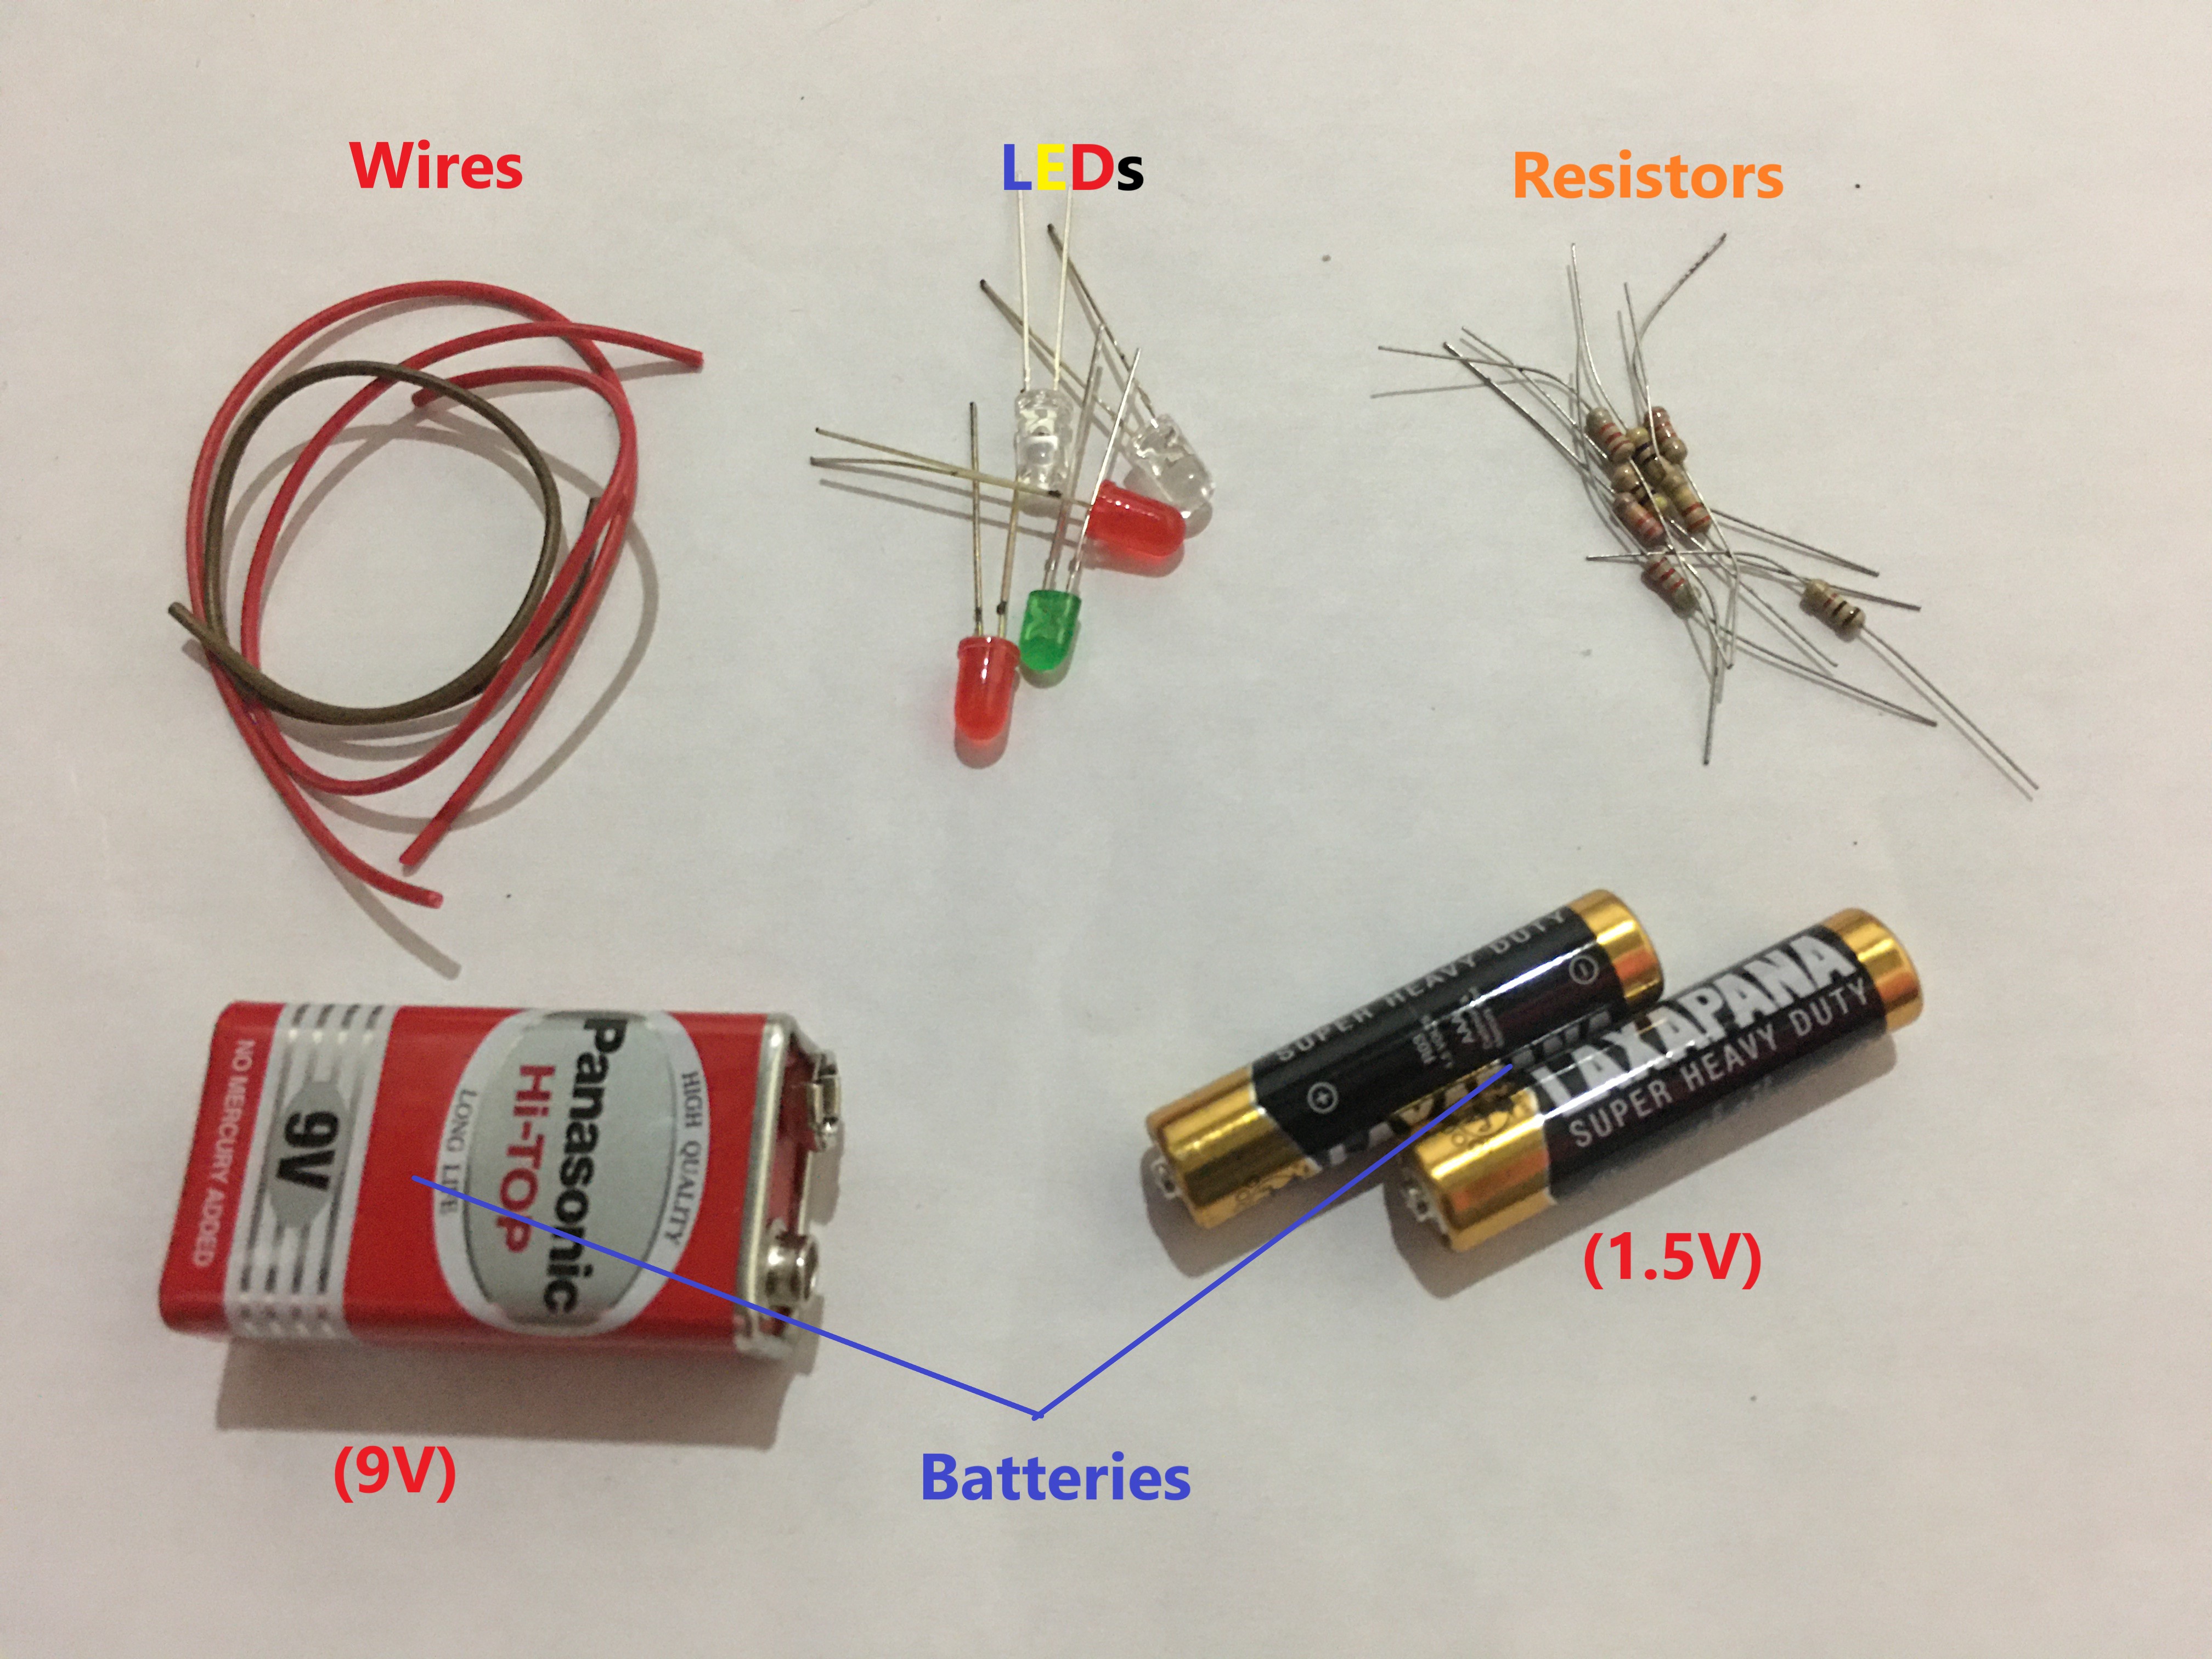 File:9v battery led circuit components (wires, battery, LED, resistor).jpg - Wikimedia Commons